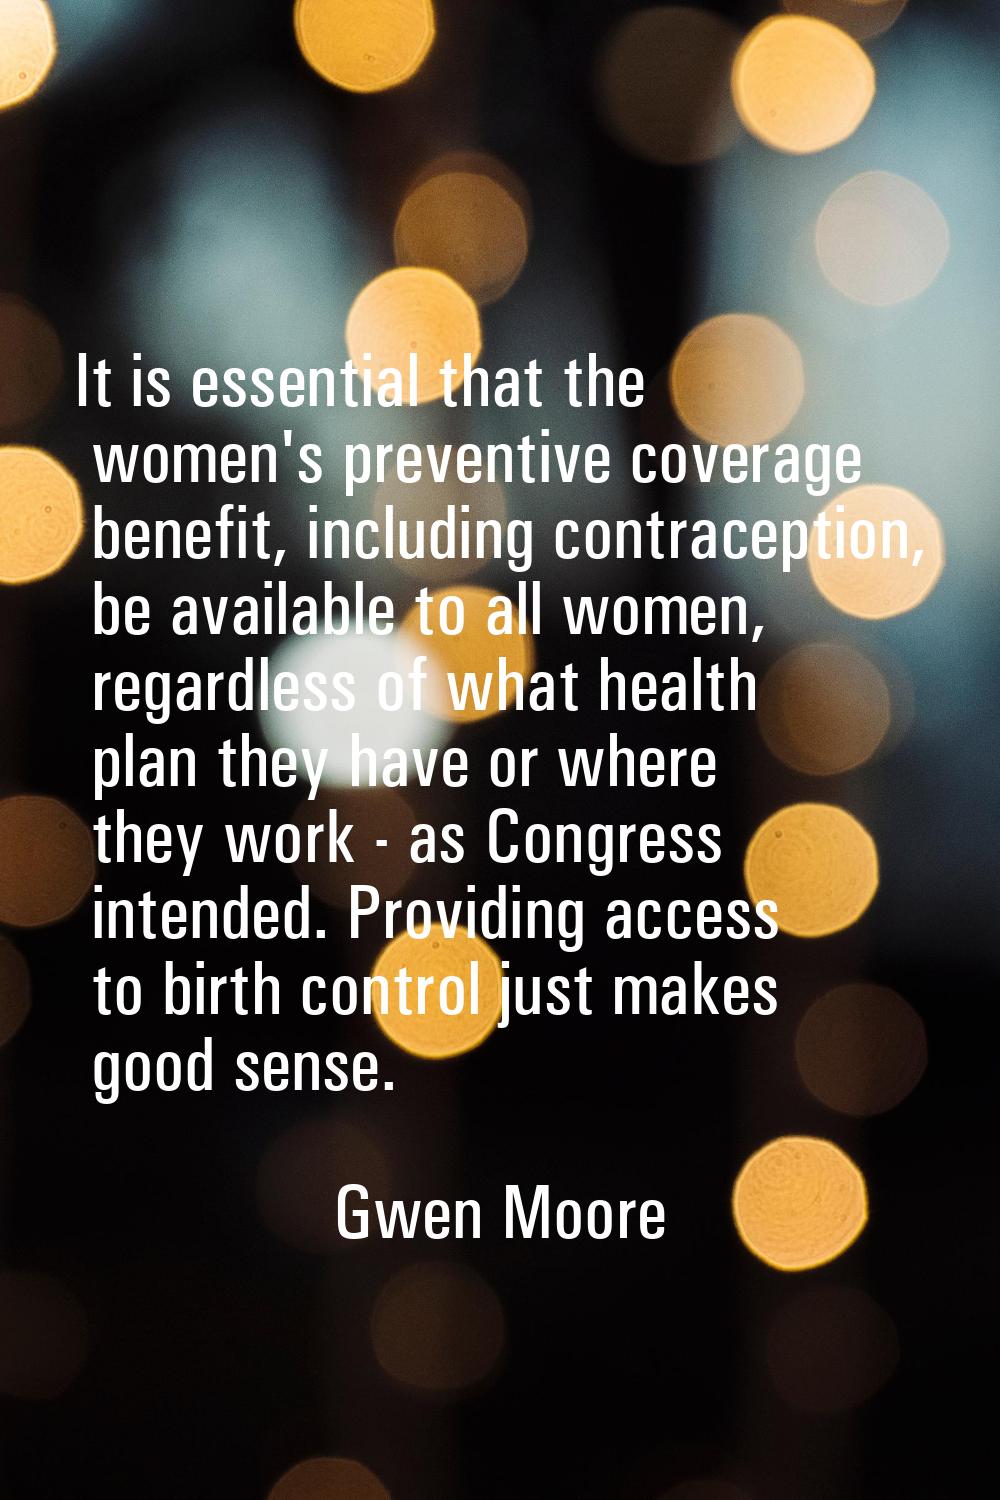 It is essential that the women's preventive coverage benefit, including contraception, be available